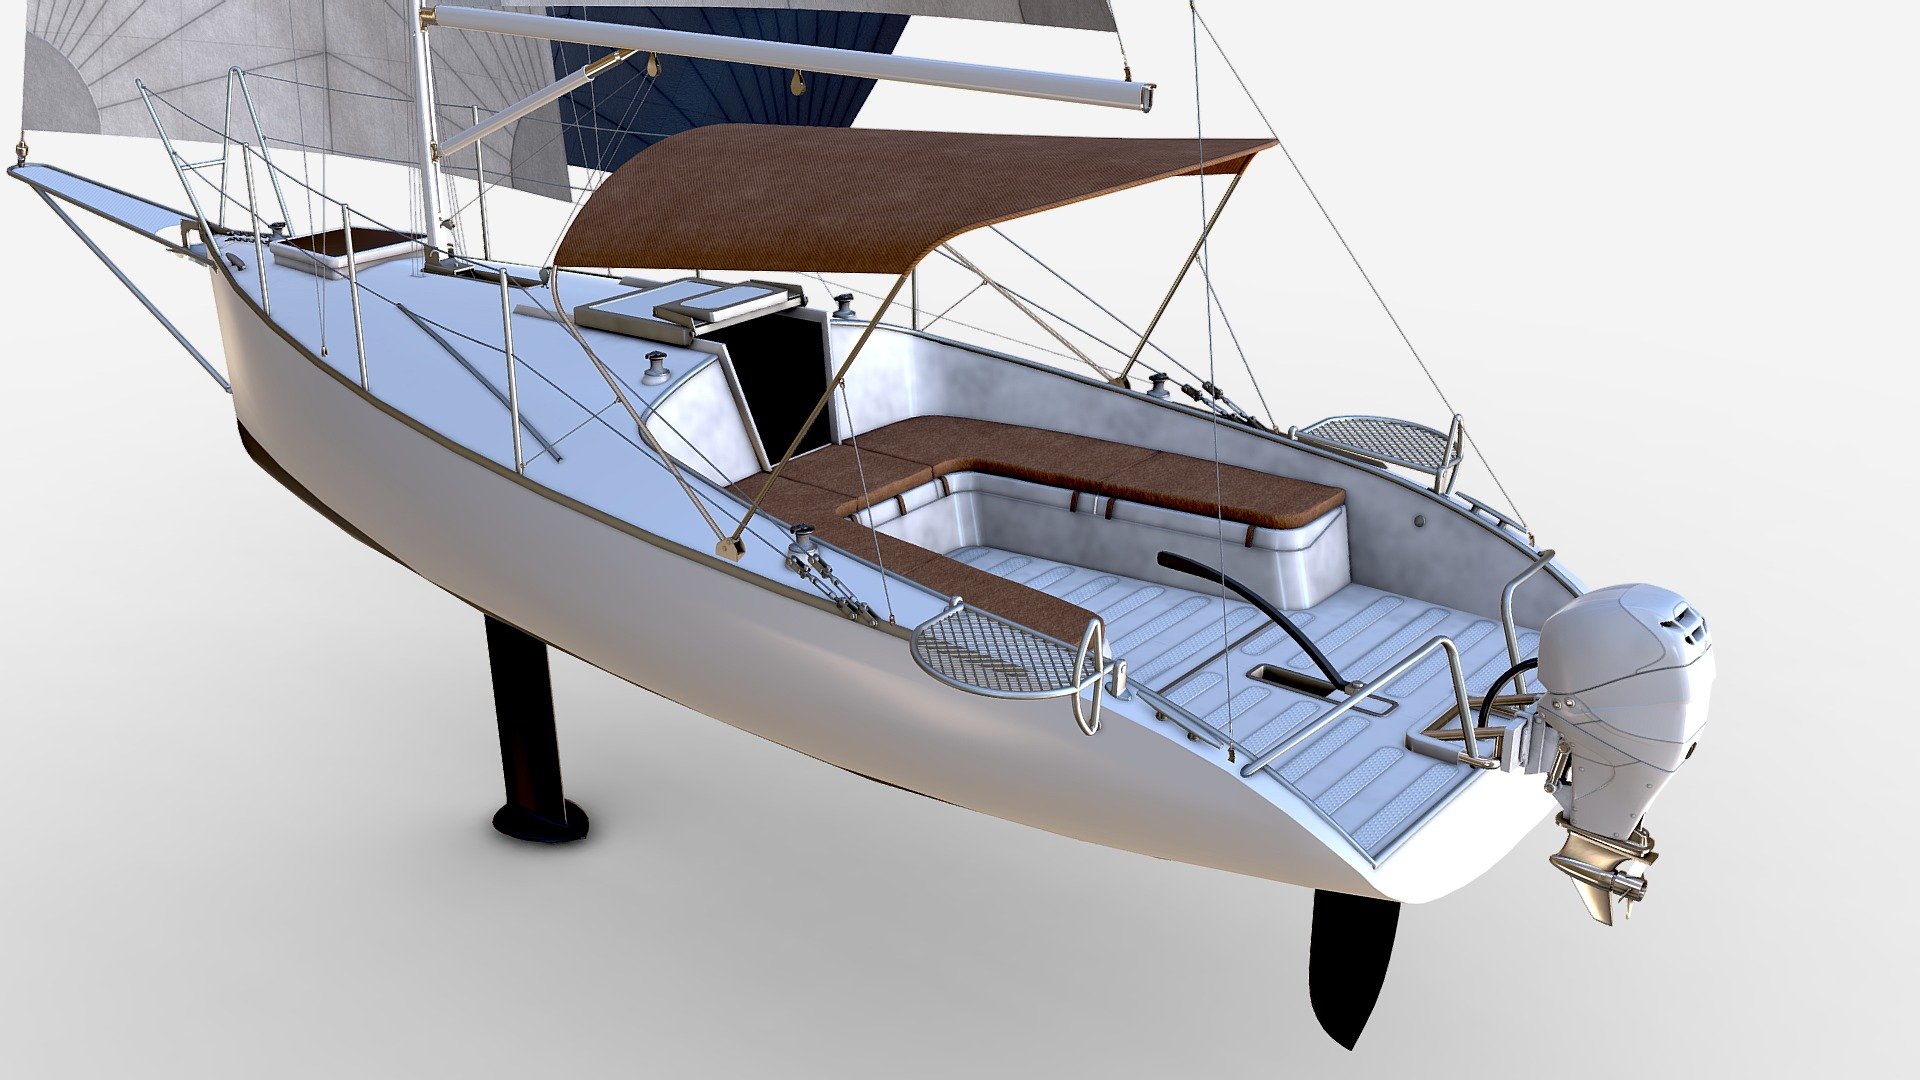 Model of a small sailing boat.
Each sail can be removed
Sun visor and outboard motor can be removed
Model formats:
.max (3ds Max 2016 VRay)
.blender
.fbx (Multi Format)
.obj (Multi Format)
*.ma (Maya 2018)
Fits well for close up renders 3d model